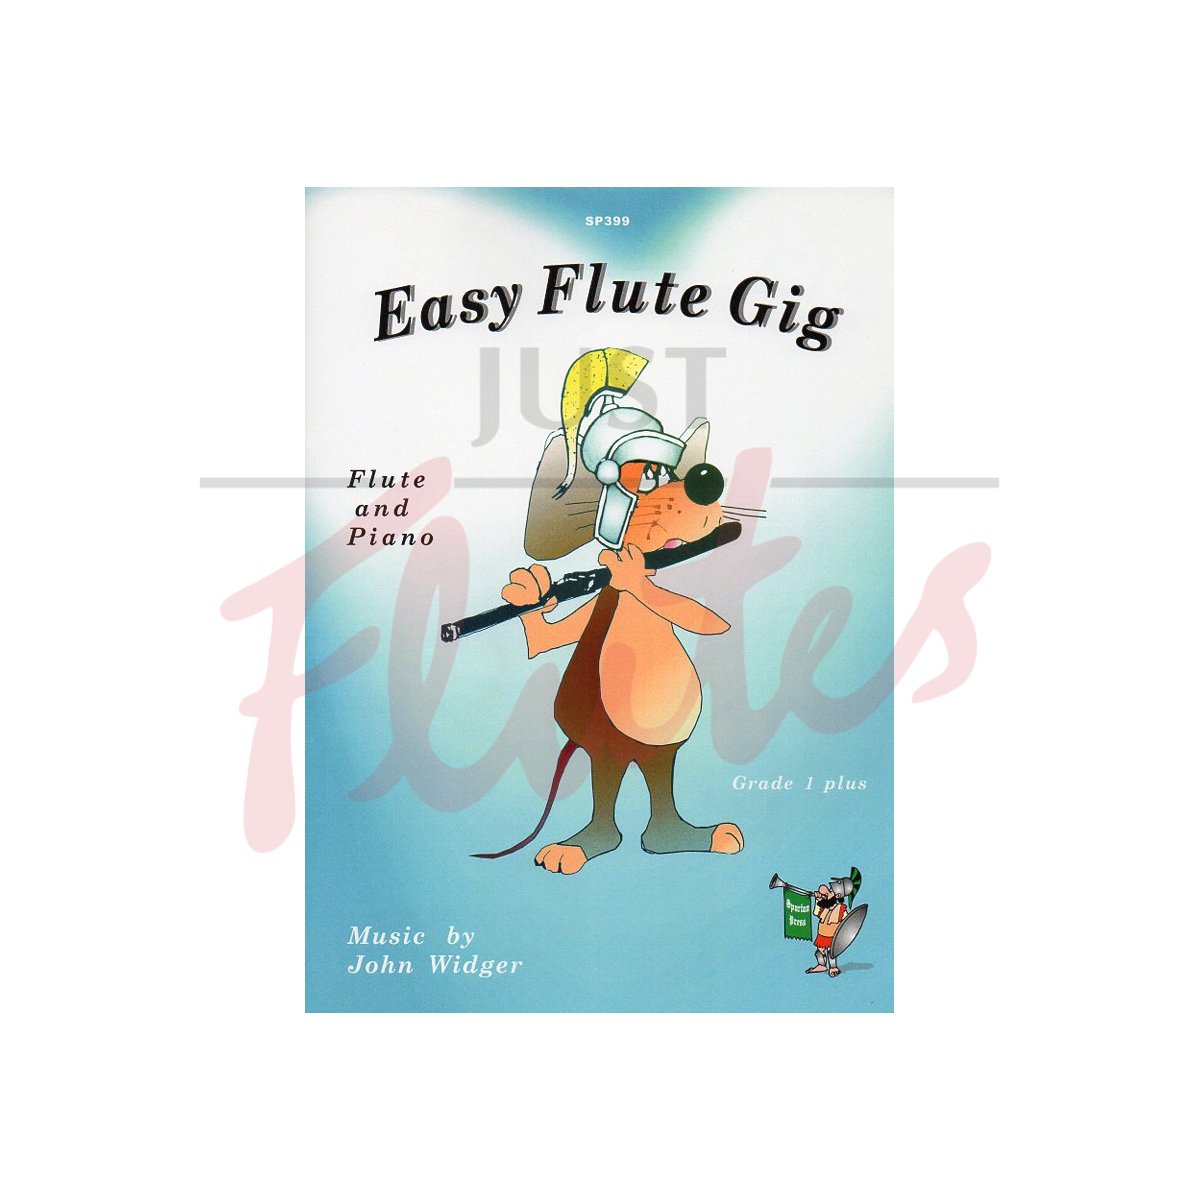 Easy Flute Gig for Flute and Piano